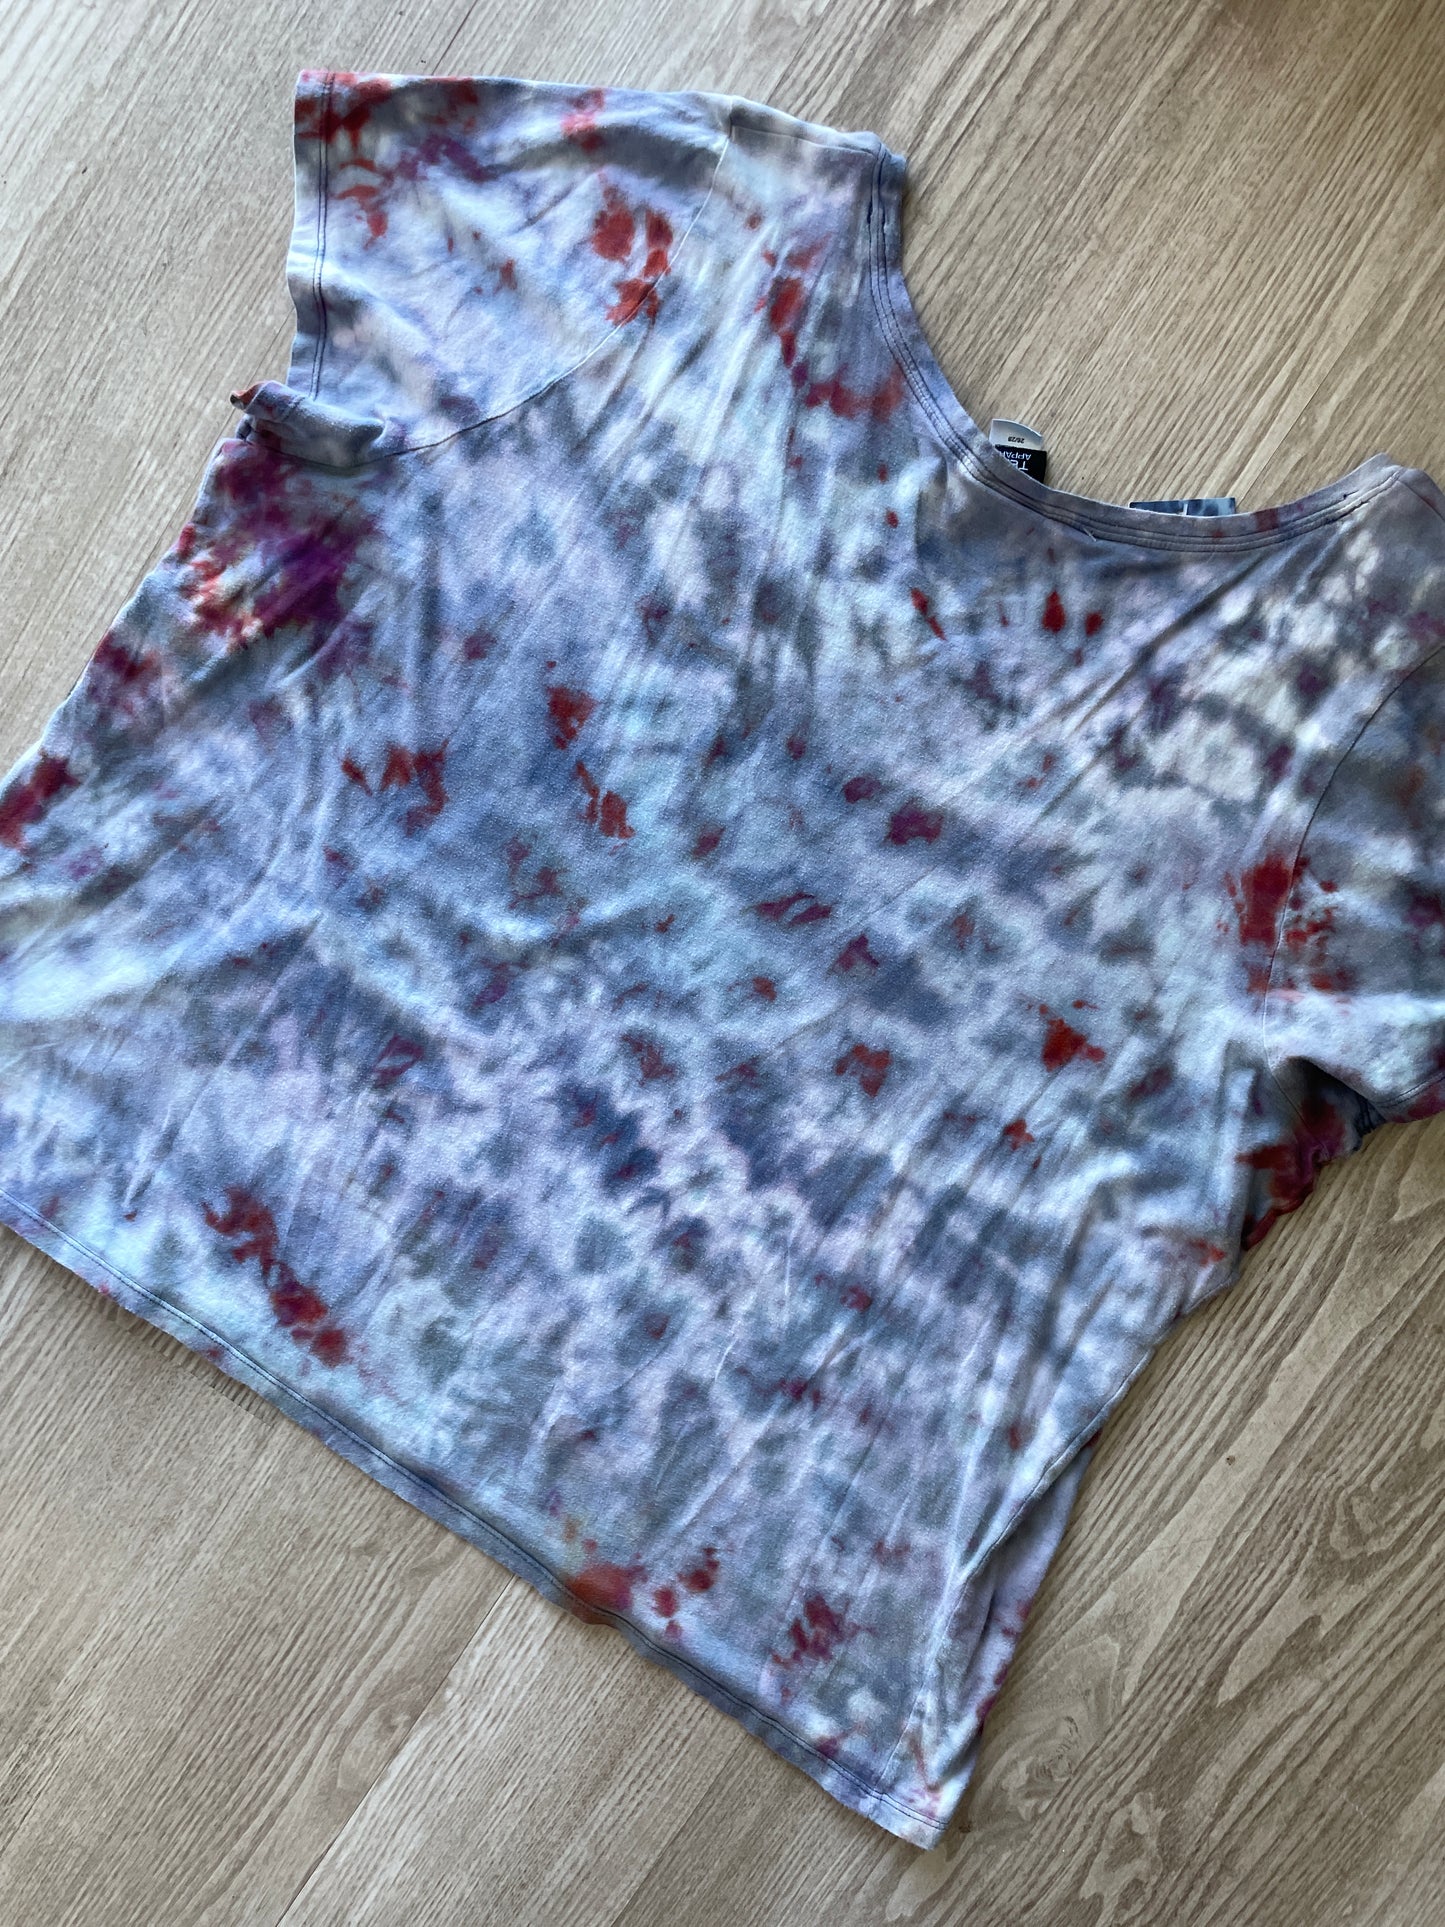 2XL Women’s Chicago Bears Handmade Galaxy Tie Dye Short Sleeve T-Shirt | One-Of-a-Kind Upcycled Gray and Orange Top